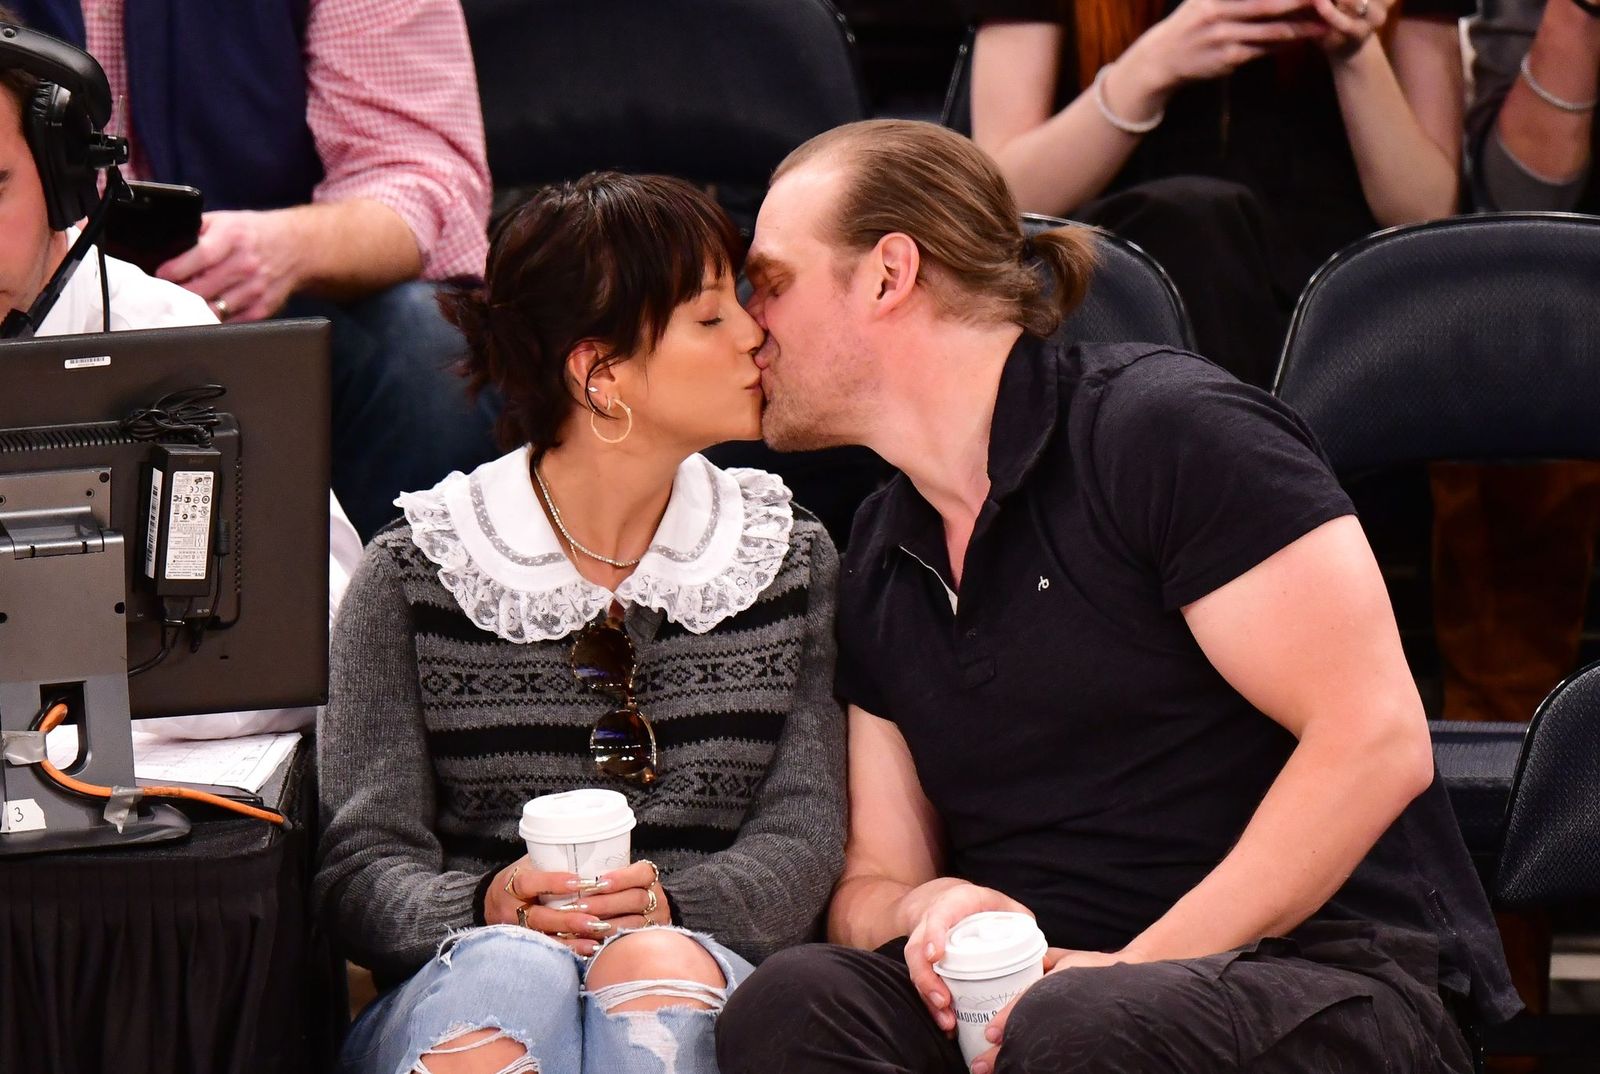 Lily Allen and David Harbour at New York Knicks v New Orleans Pelicans preseason game on October 18, 2019, in New York City | Photo: James Devaney/Getty Images